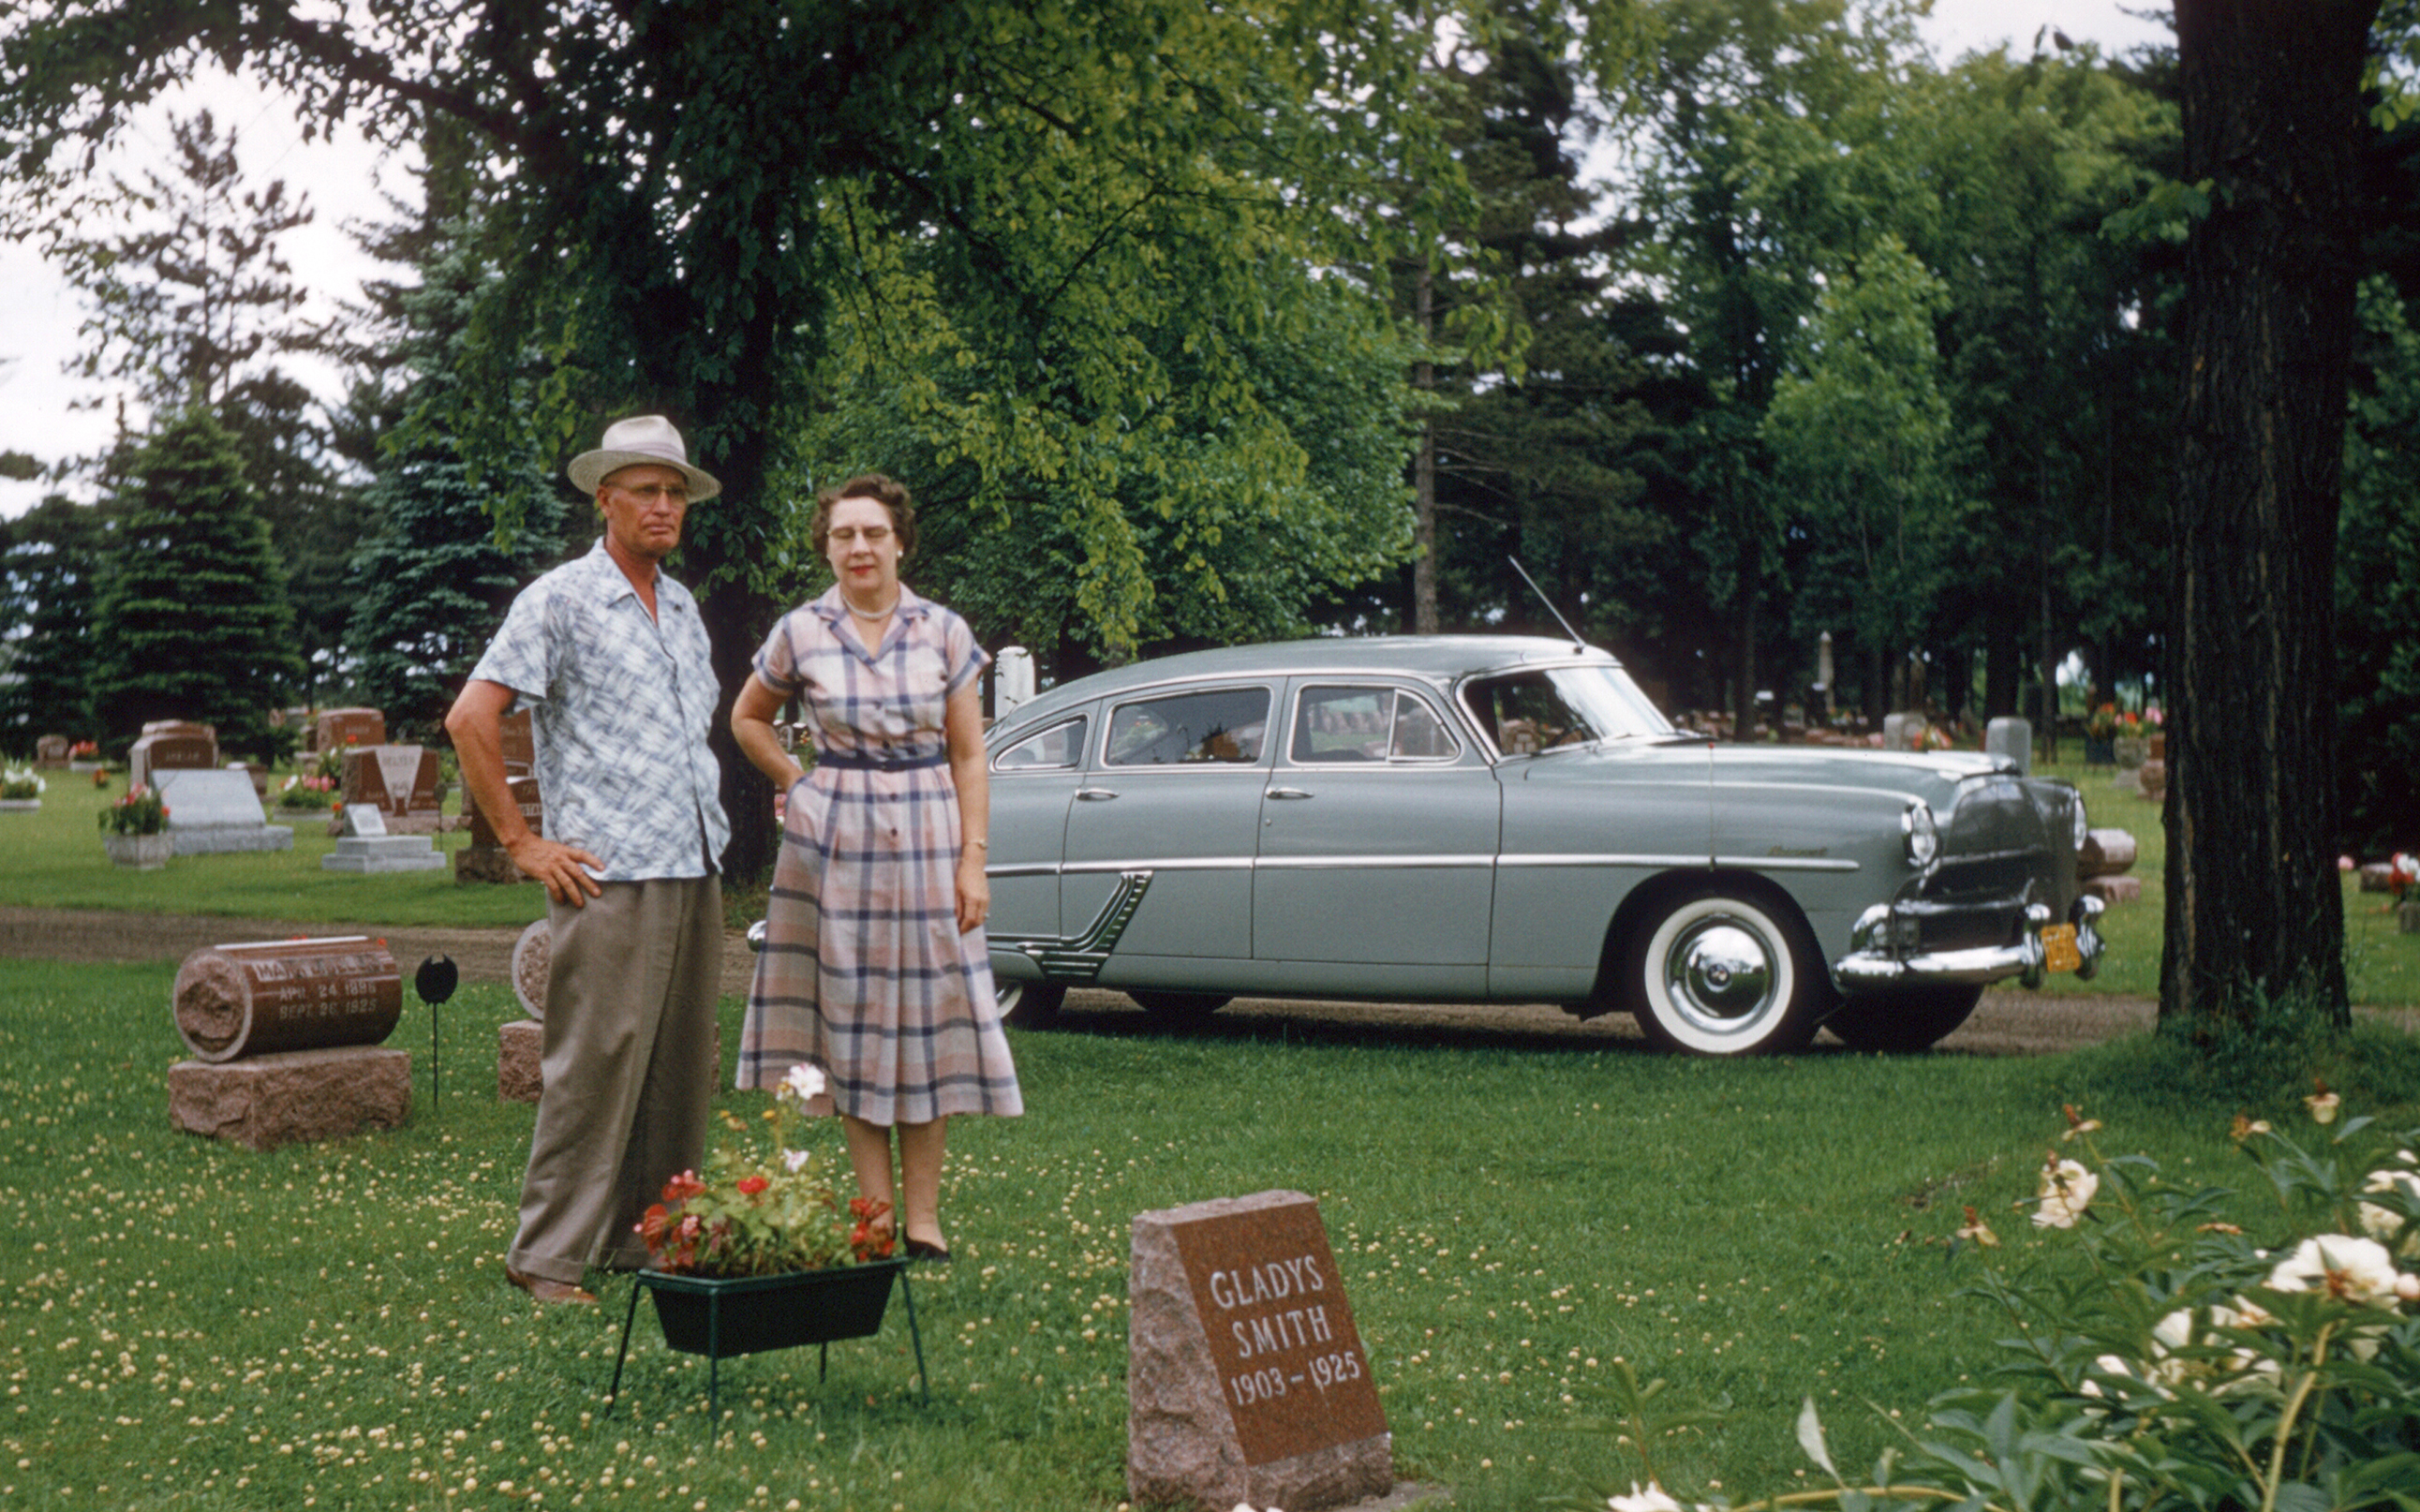 Bert has a new car -- a 1954 Hudson Hornet -- so must take a picture of it while he and Iva visit someone in the cemetery. From my late father-in-law's father's slides. Bert worked for the railroad and loved his cars. They lived in Wausau, Wisconsin, but I'm not sure where this photo was taken. View full size.